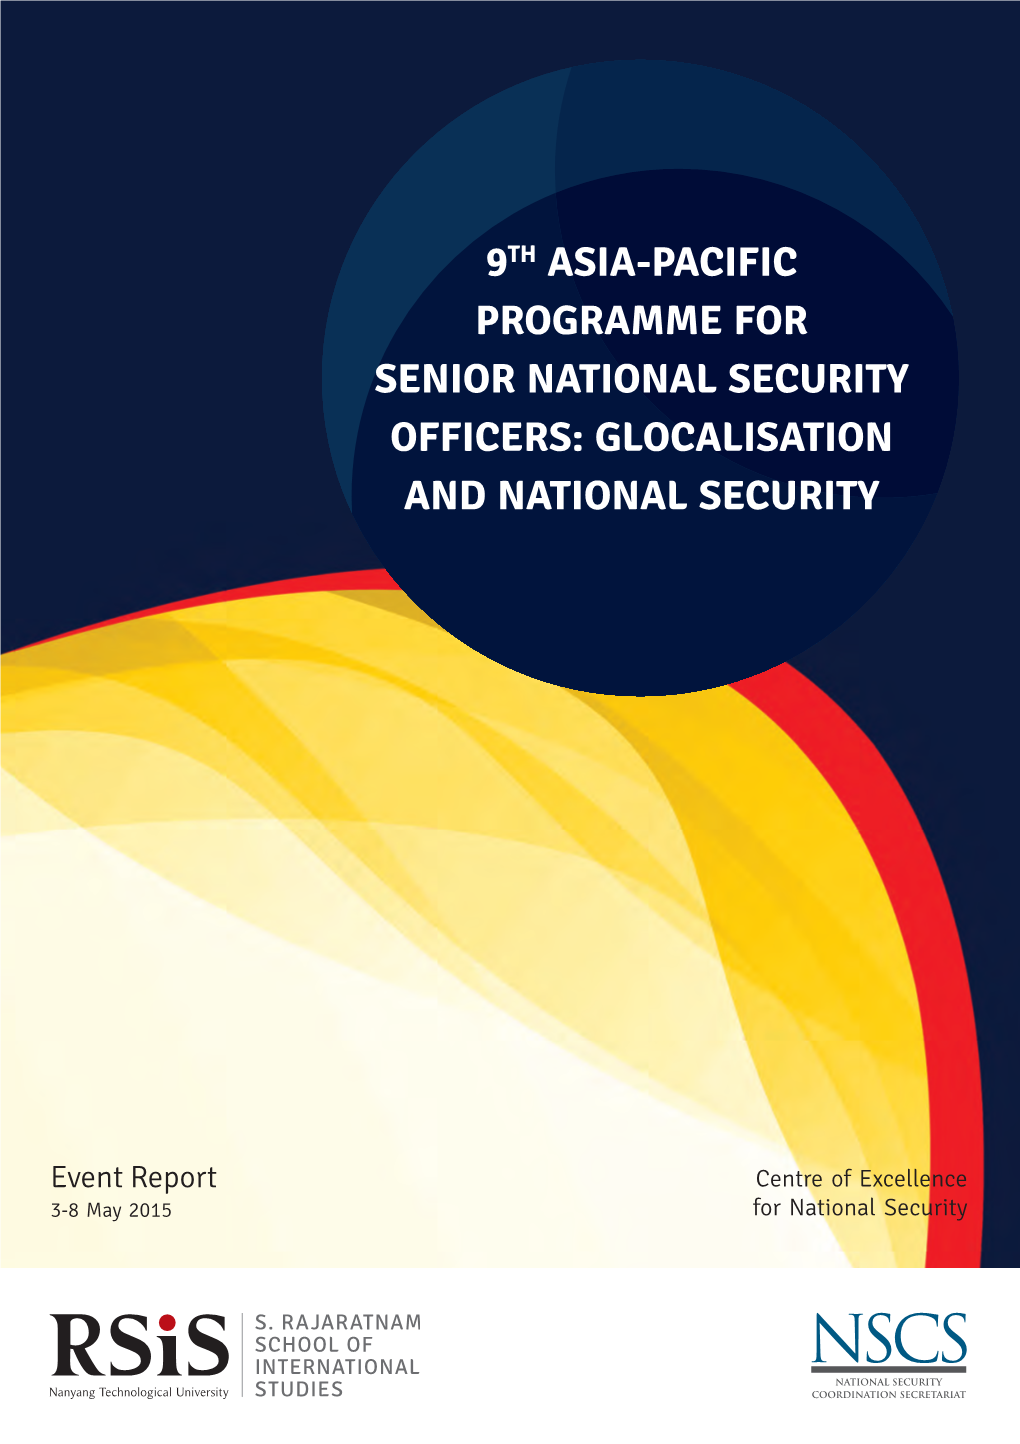 9Th Asia-Pacific Programme for Senior National Security Officers: Glocalisation and National Security